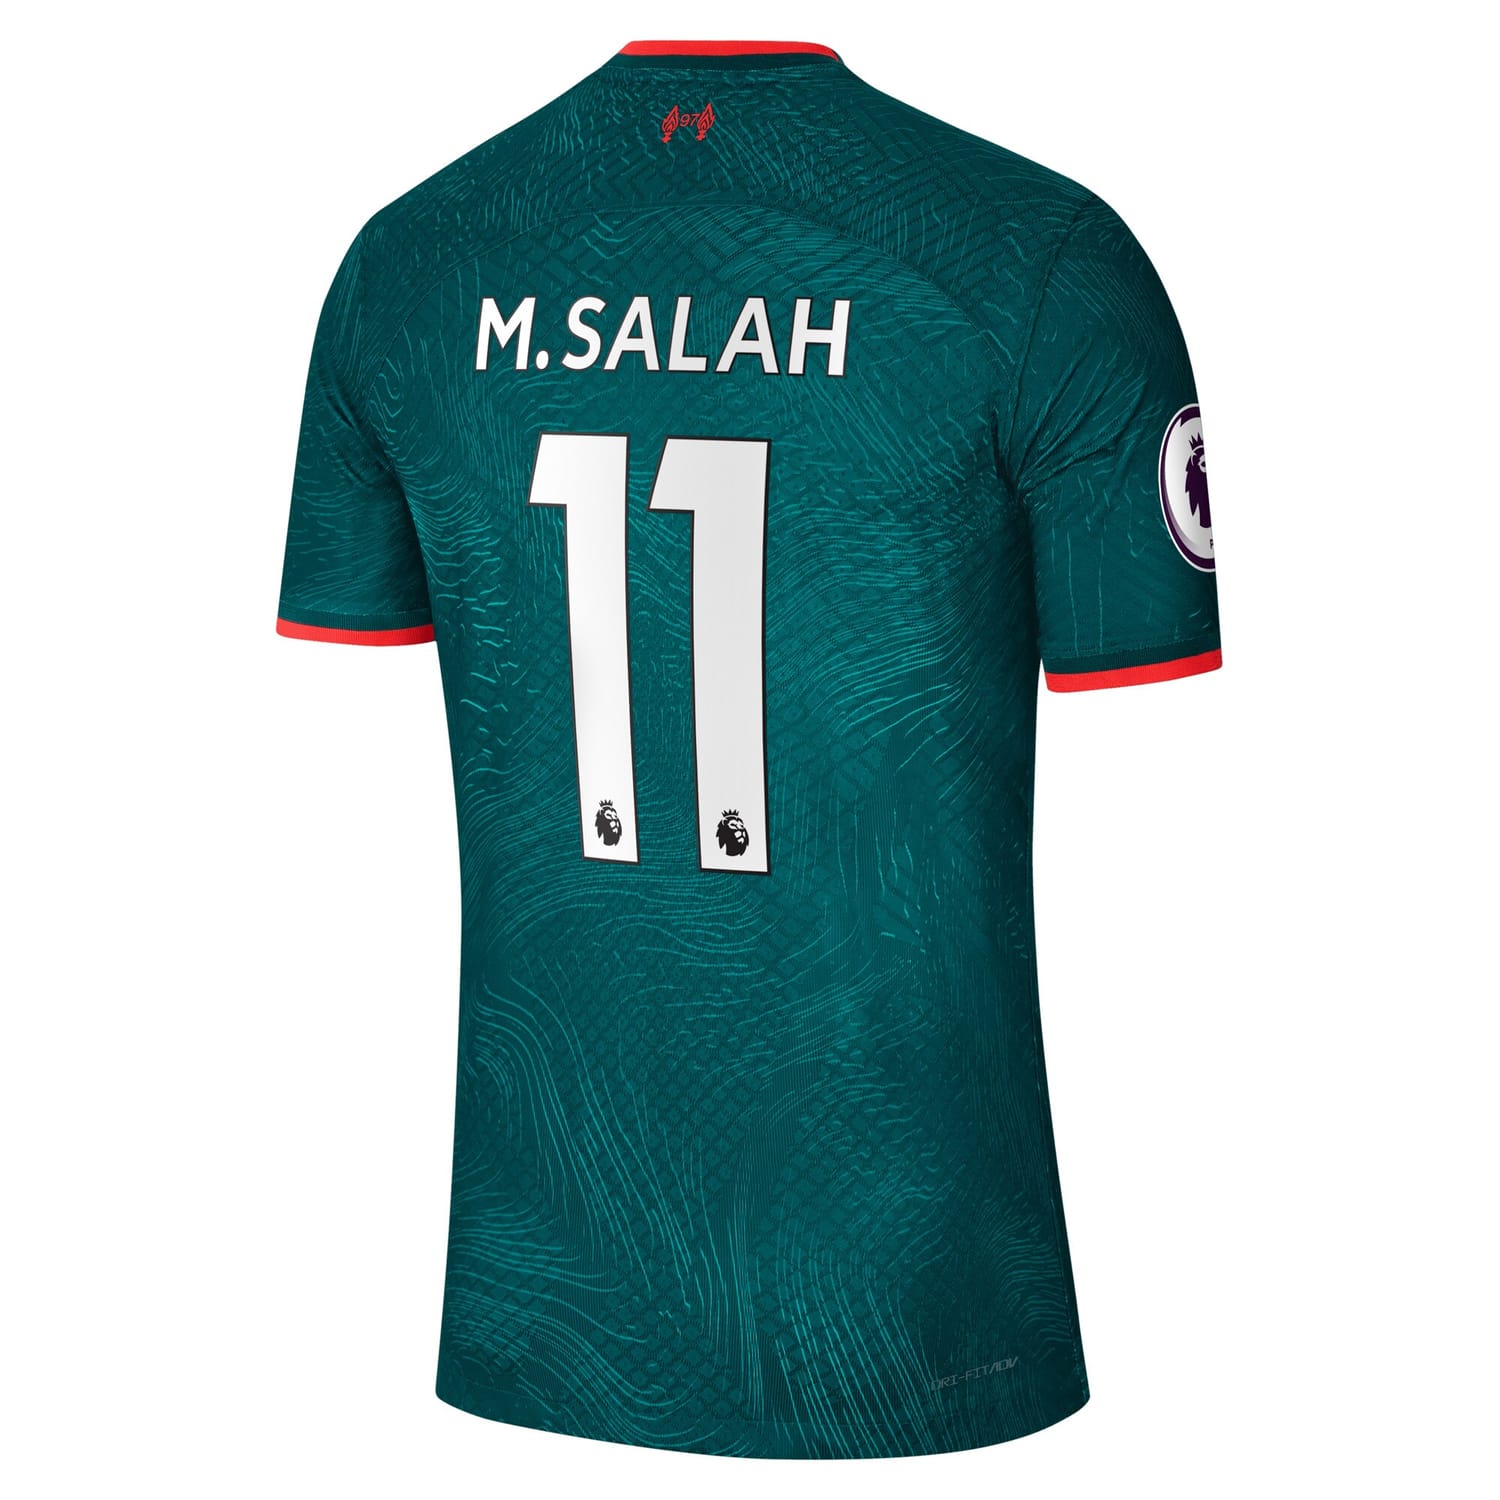 Premier League Liverpool Third Authentic Jersey Shirt Teal 2022-23 player Mohamed Salah printing for Men